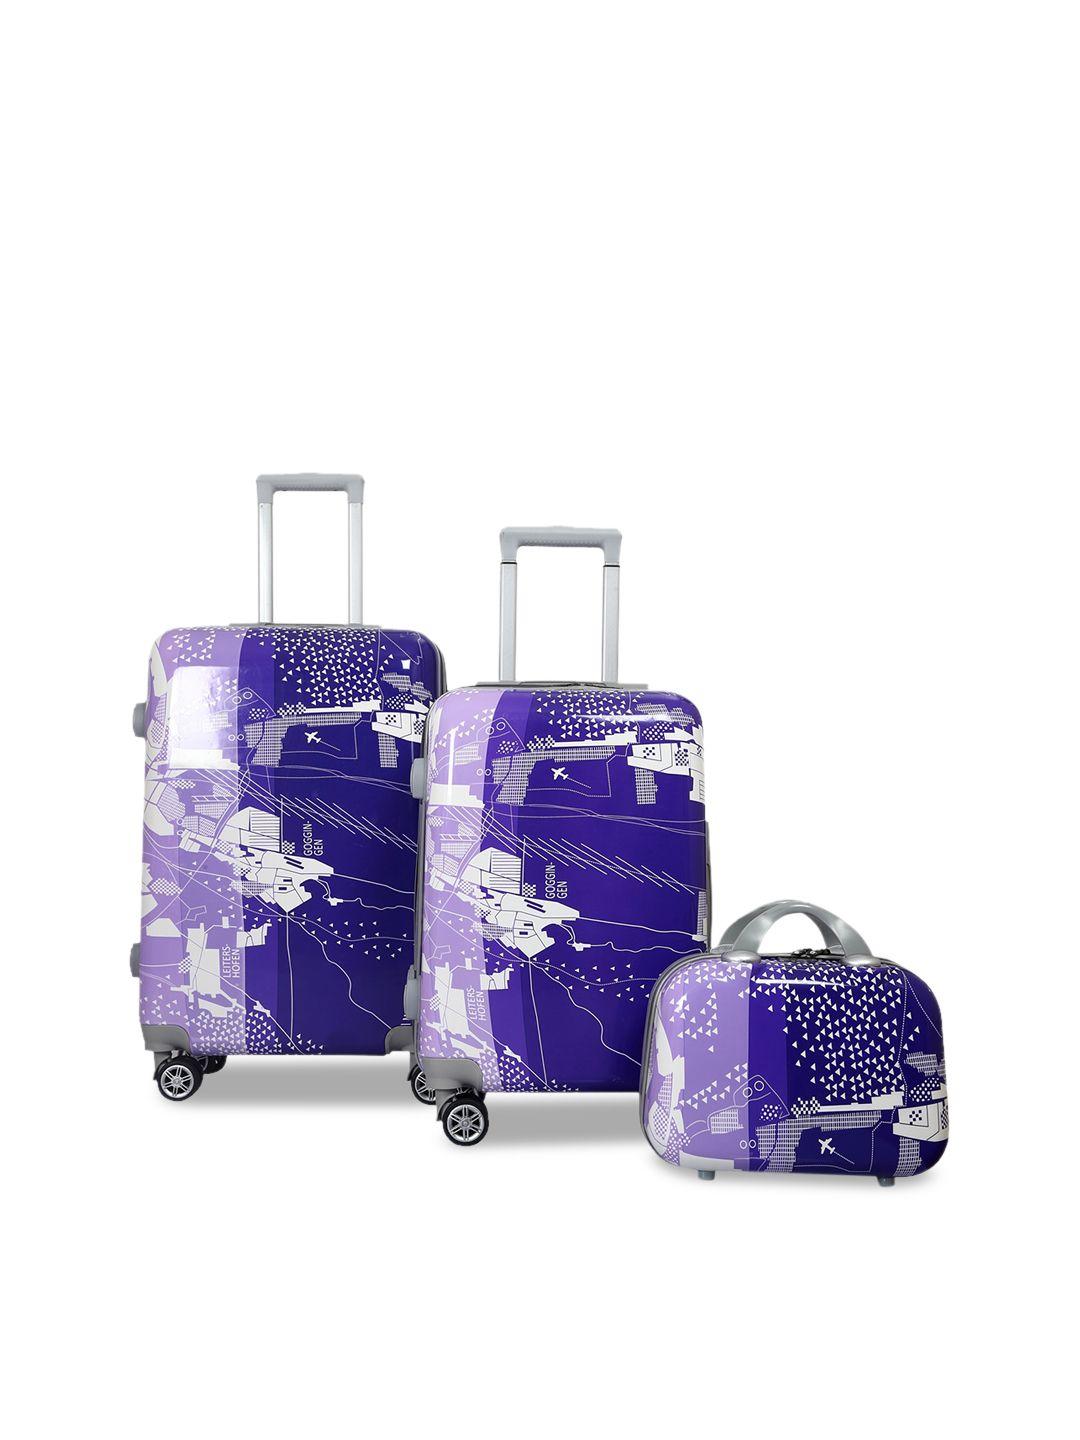 polo class set of 3 printed hard case luggage trolley & vanity bag